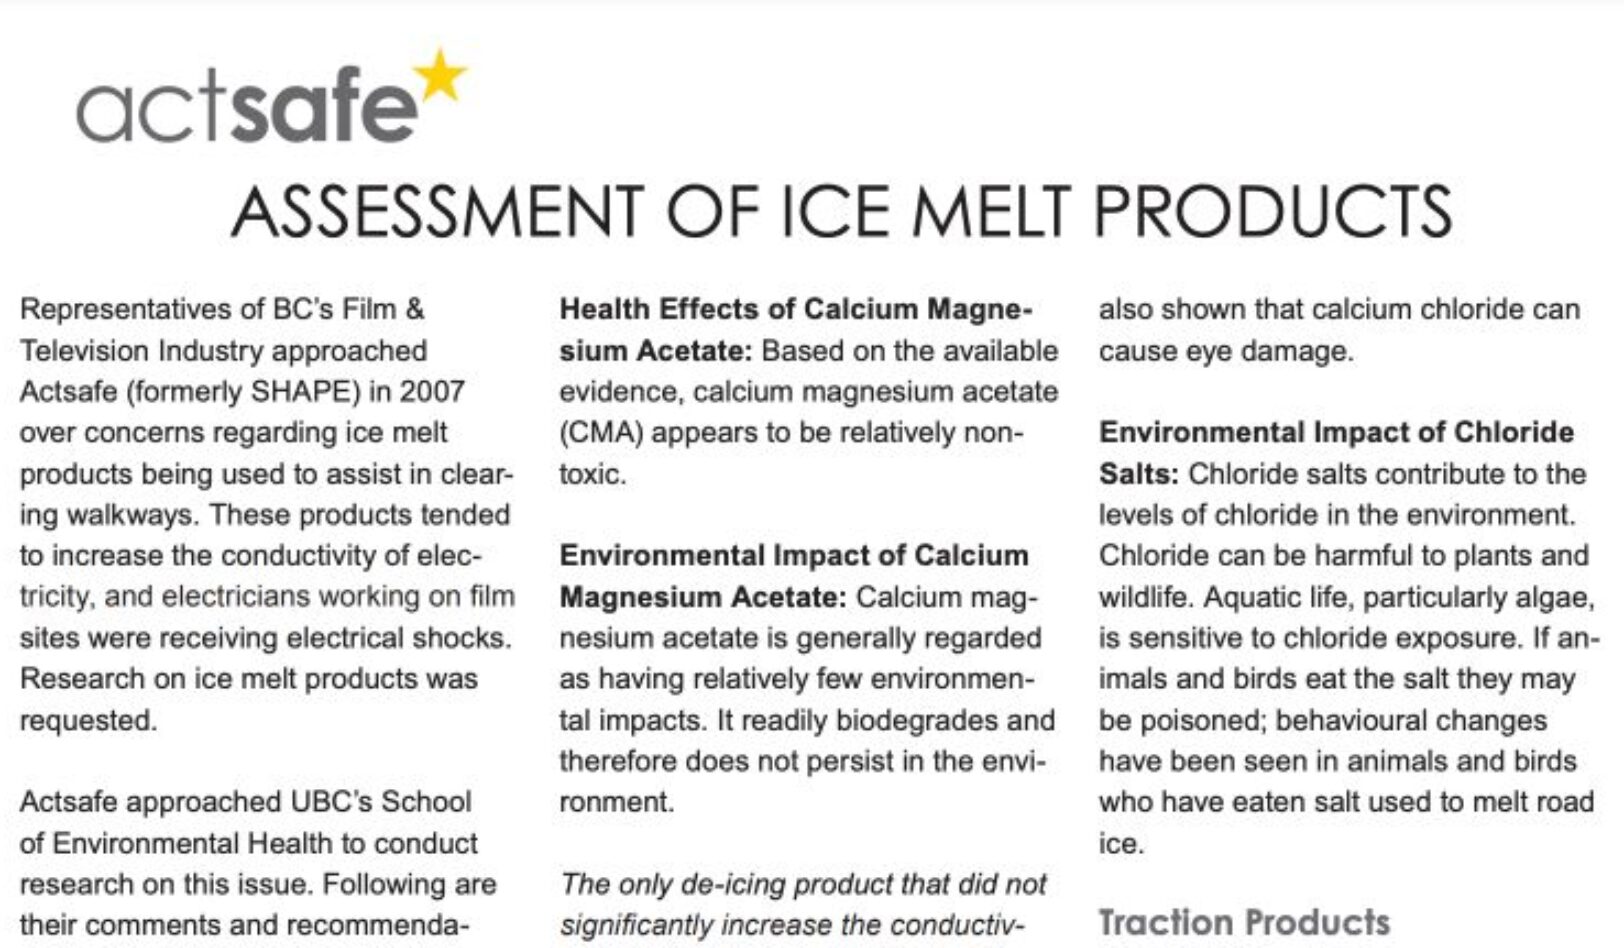 Assessment of Ice Melt Products